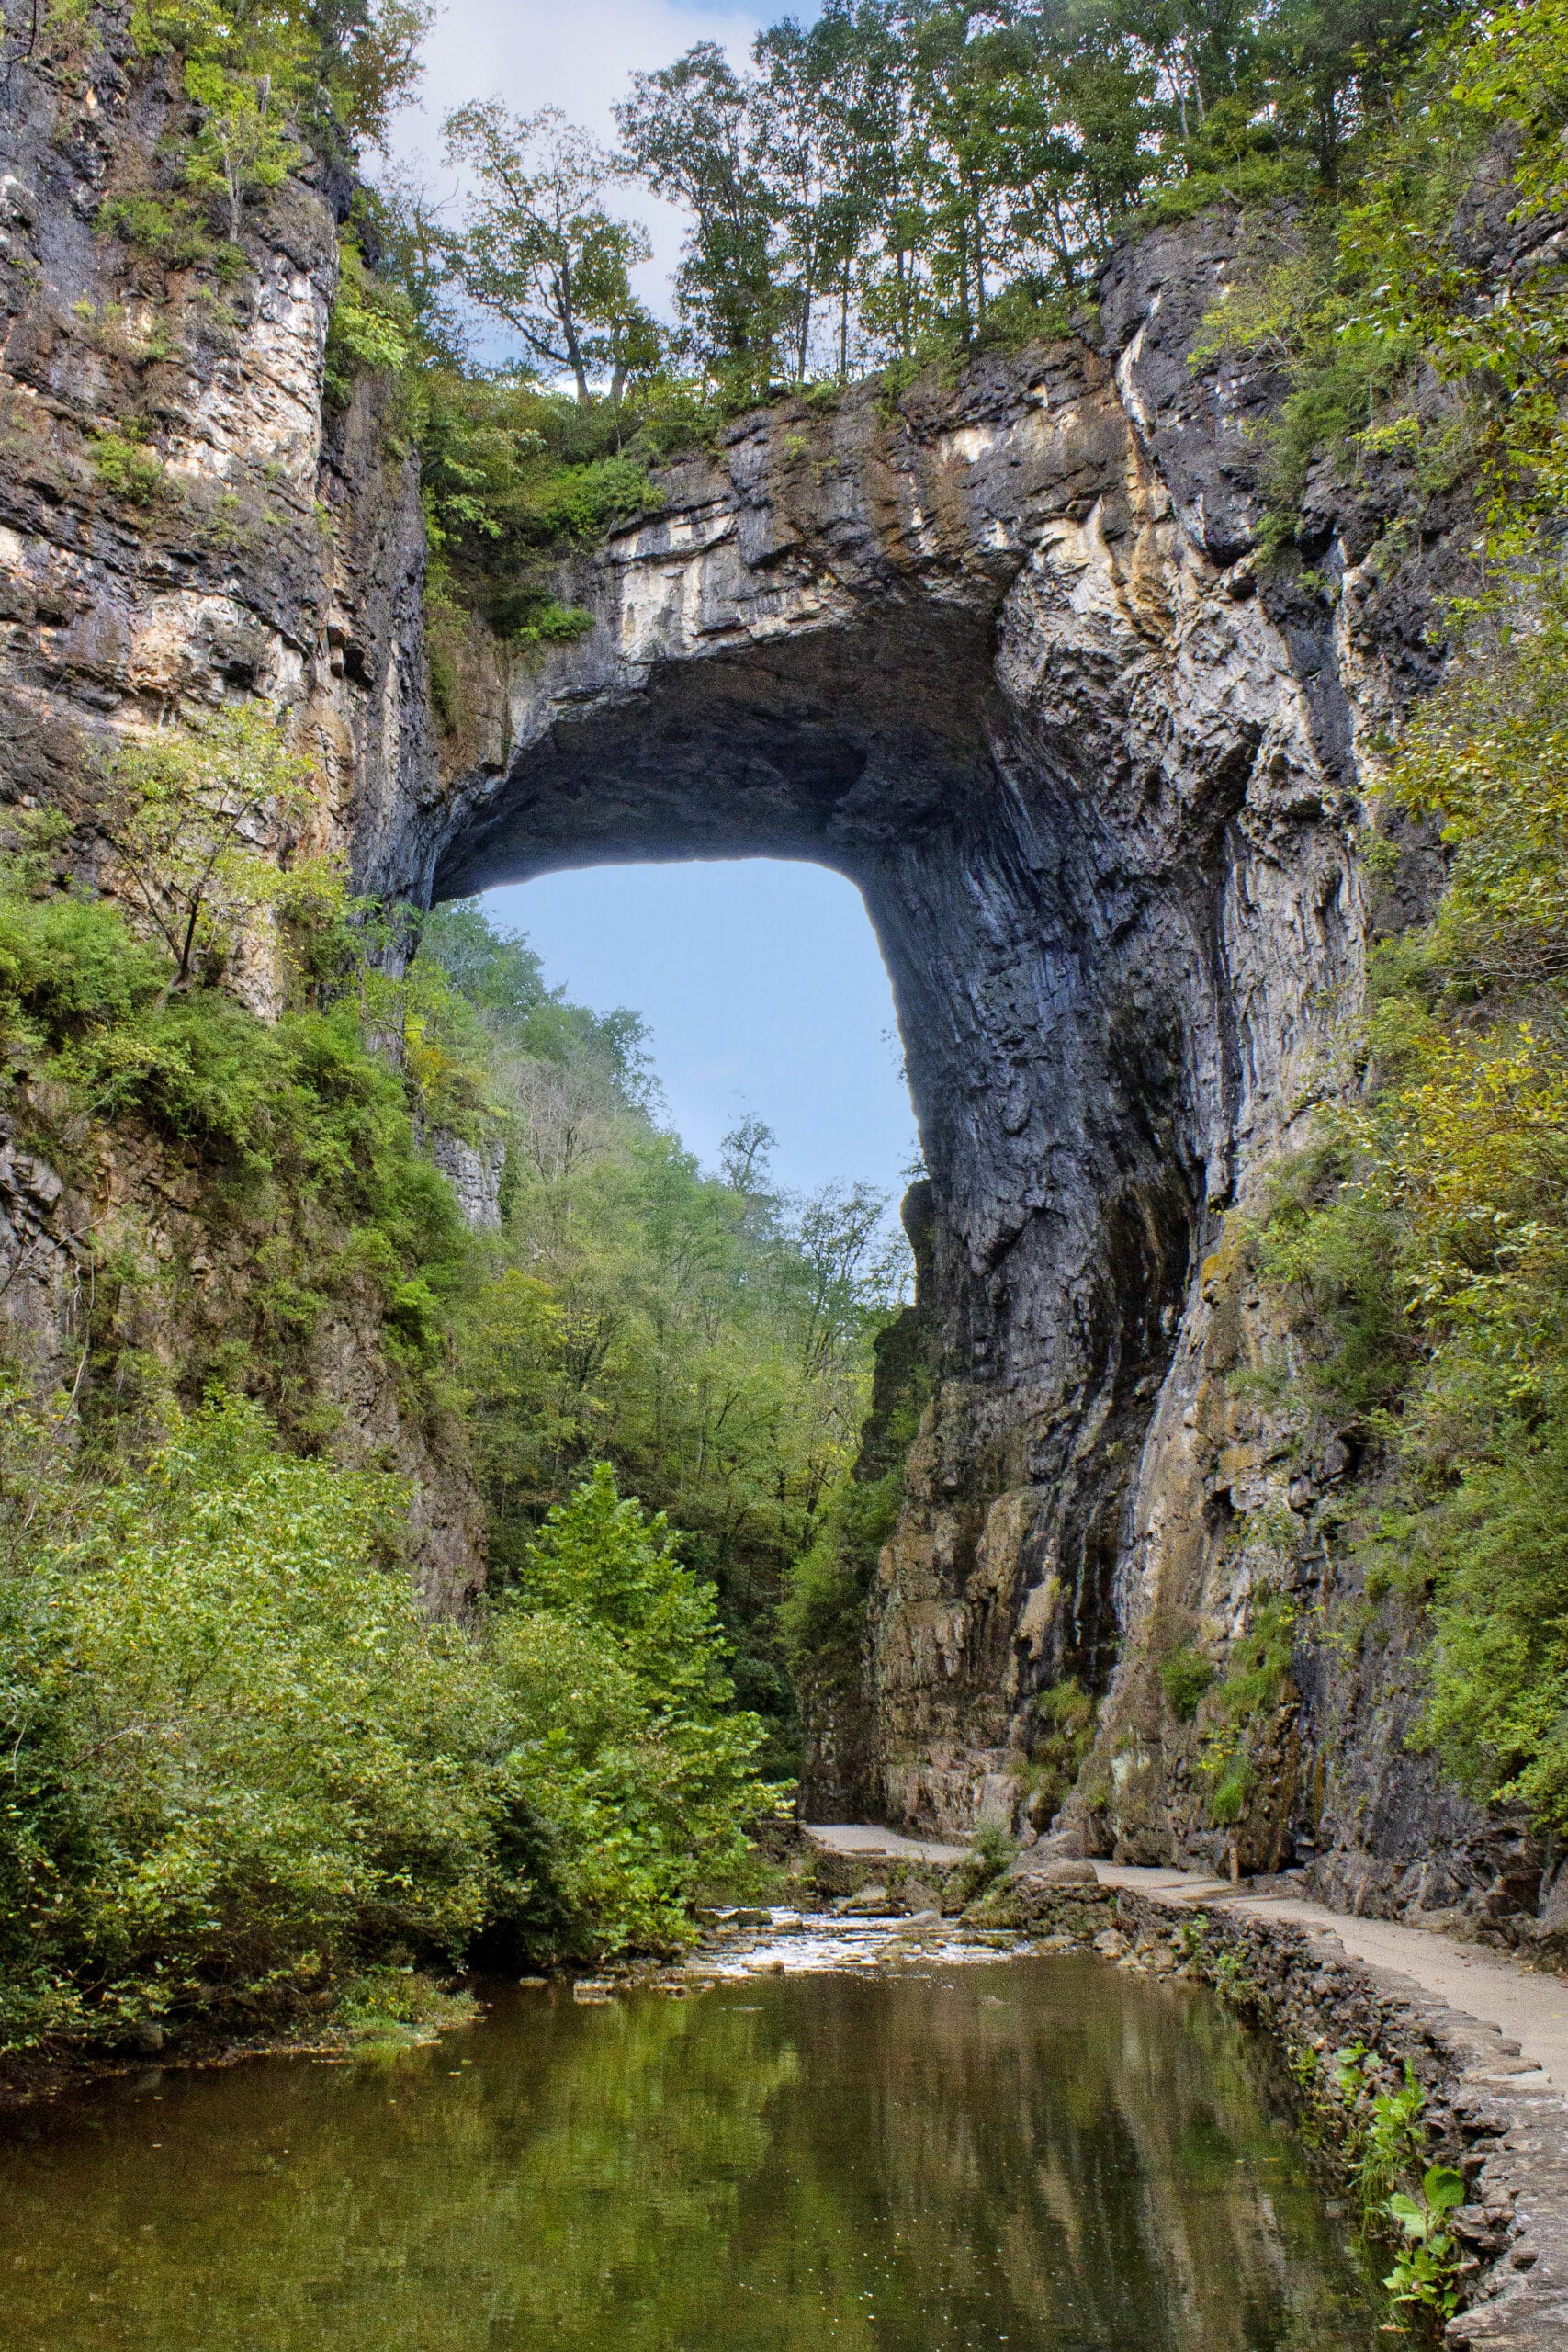 A large rock arch in the middle of a forest.